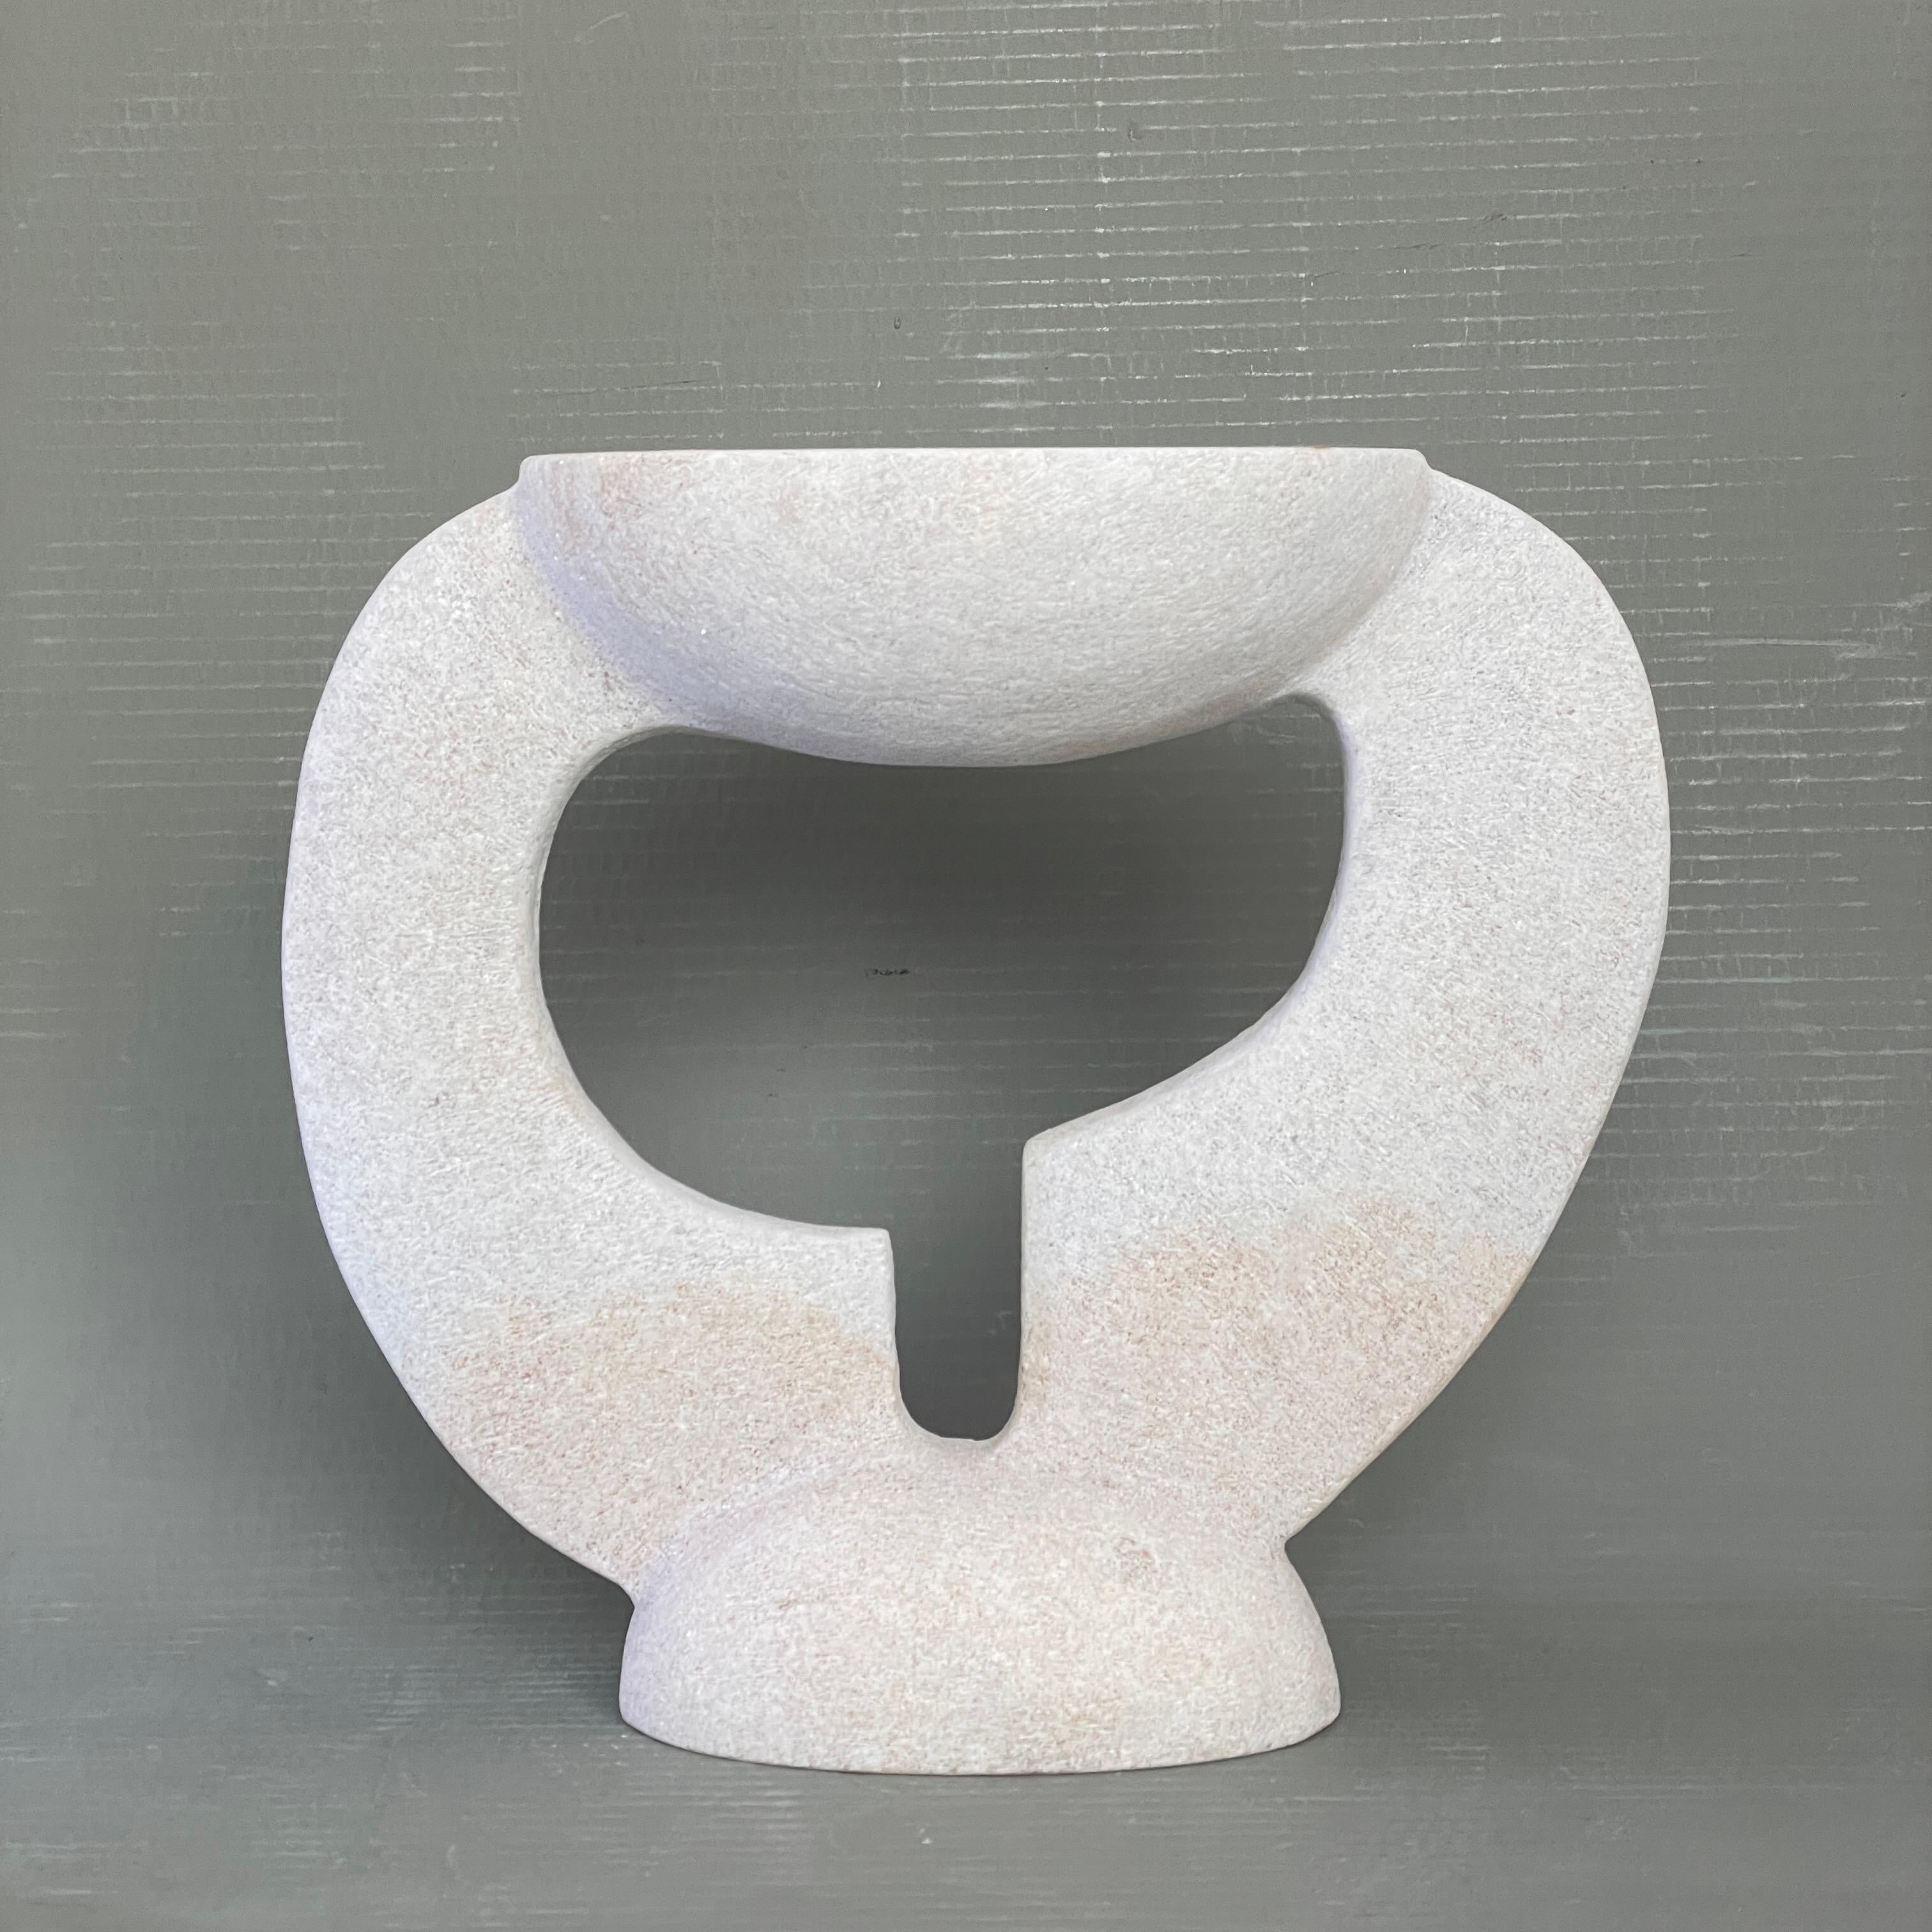 Hand carved marble vessel by Tom Von Kaenel
Materials: Marble
Dimensions: W 12 x D 28 x H 26 cm

Tom von Kaenel, sculptor and painter, was born in Switzerland in 1961. Already in his early
childhood he was deeply devoted to art. His desire to